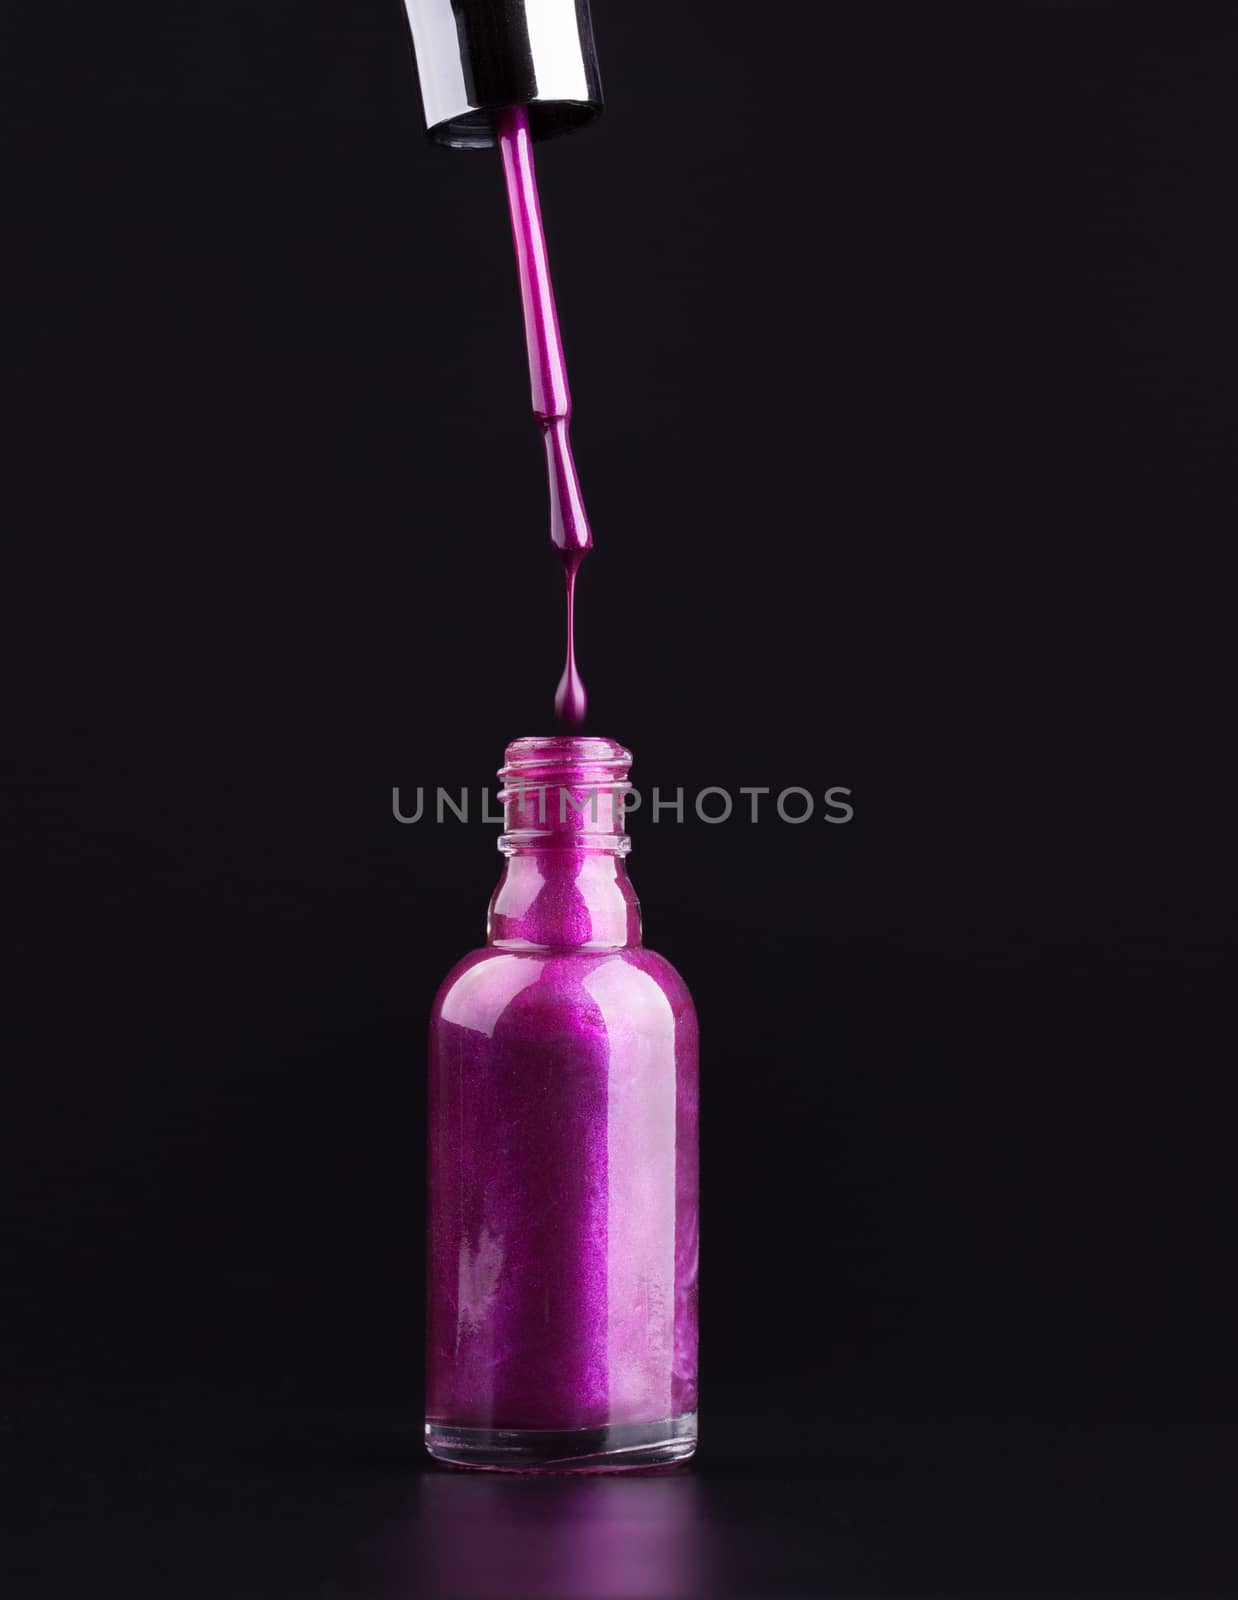 Bottle of purple nail polish by lanalanglois